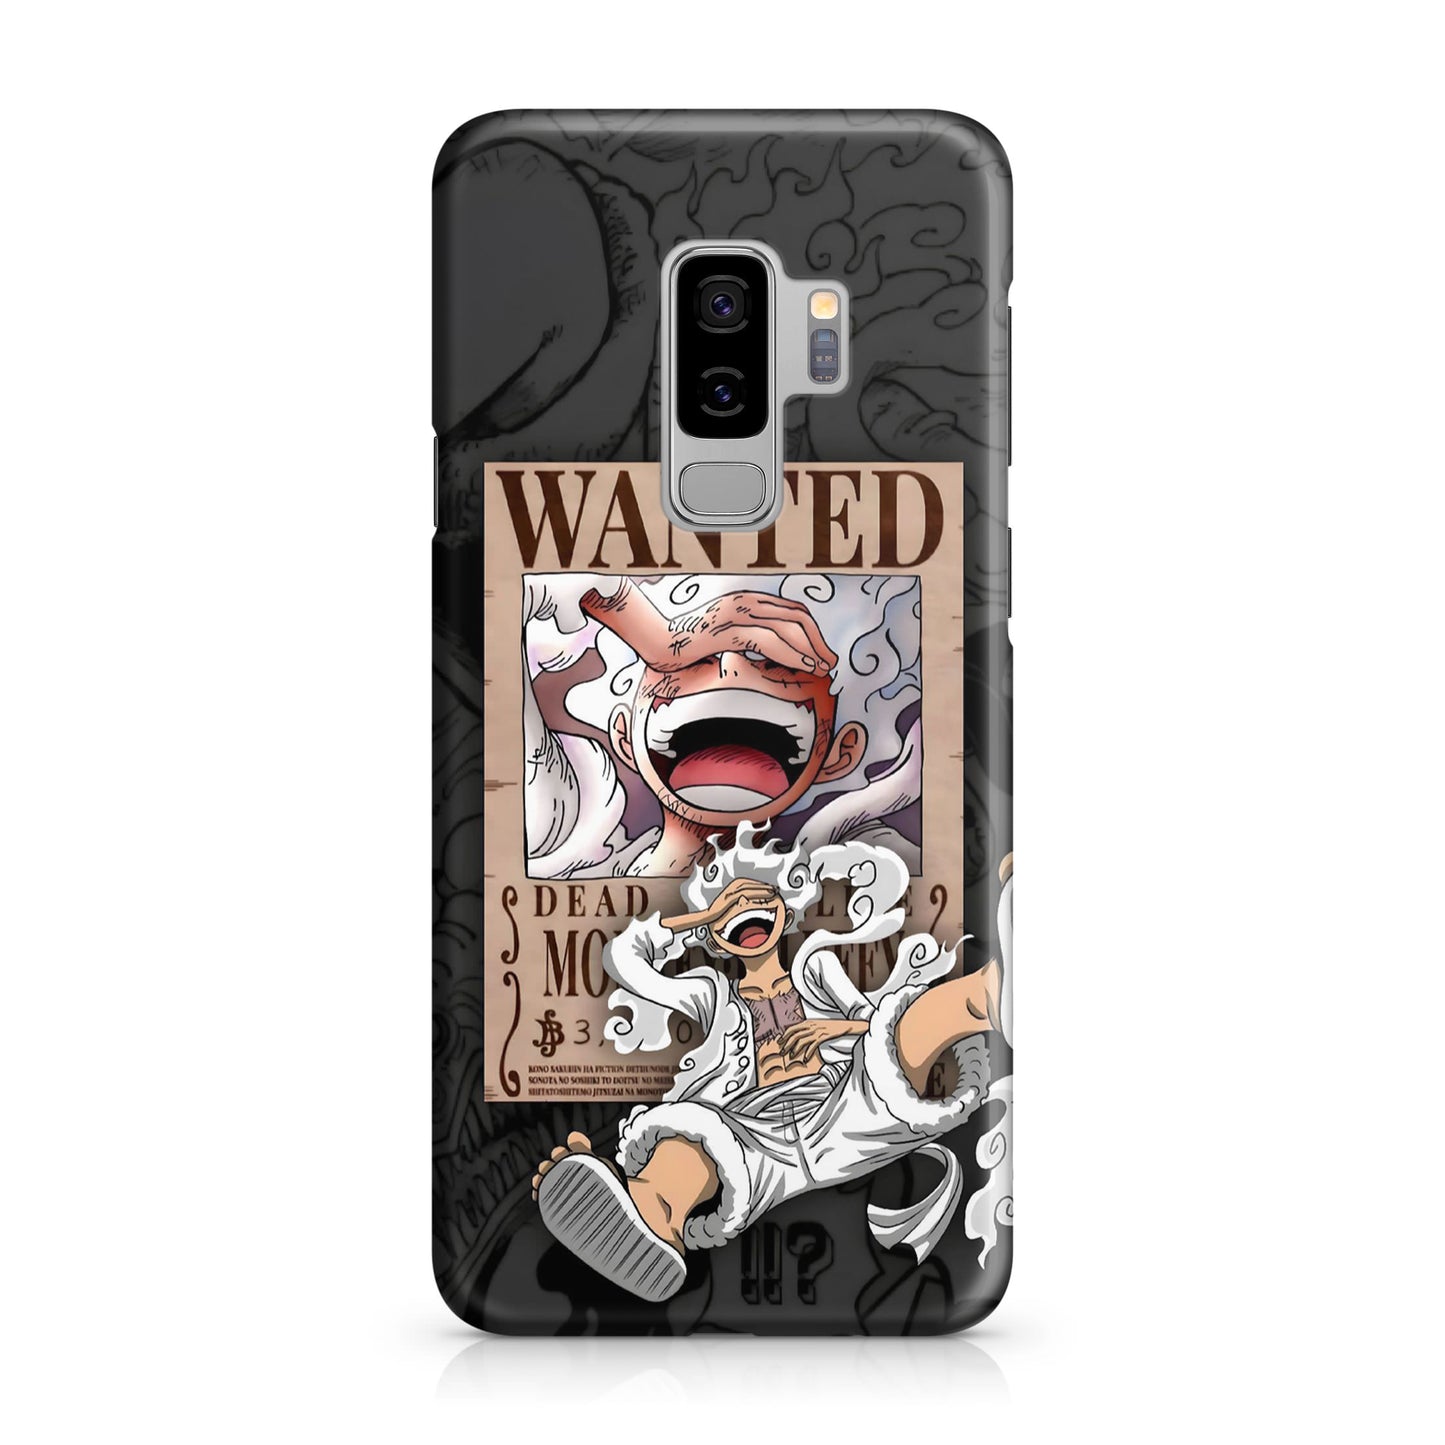 Gear 5 With Poster Galaxy S9 Plus Case